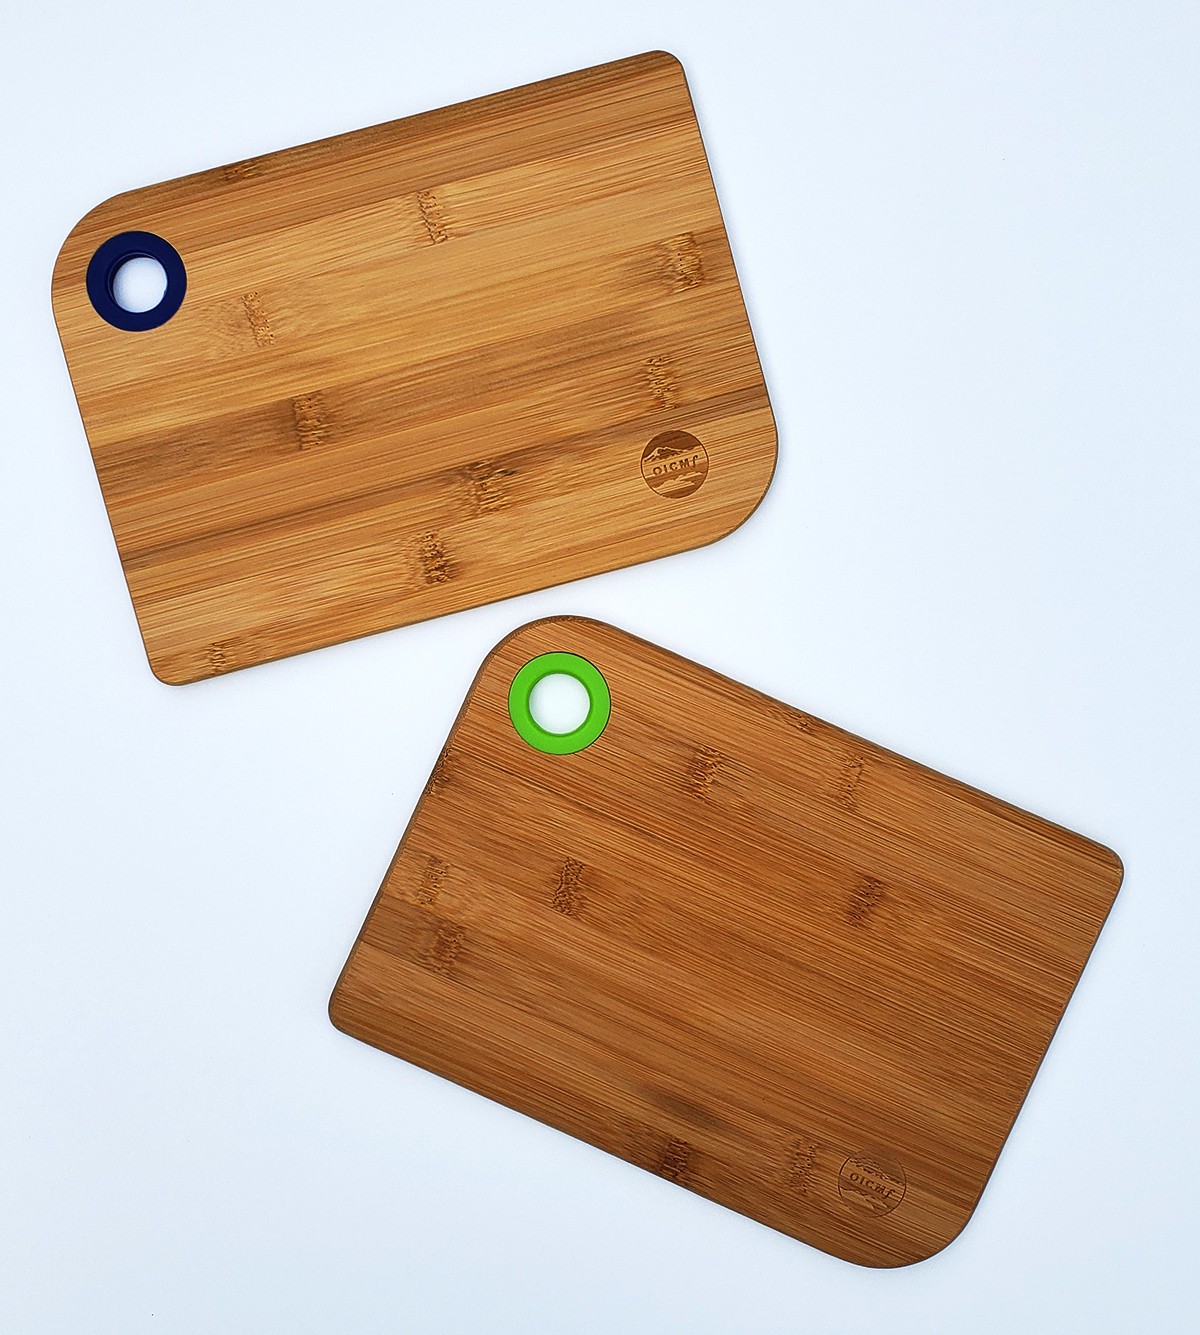 https://oicmf.org/wp-content/uploads/2023/08/oicmf-bamboo-cutting-boards.jpg